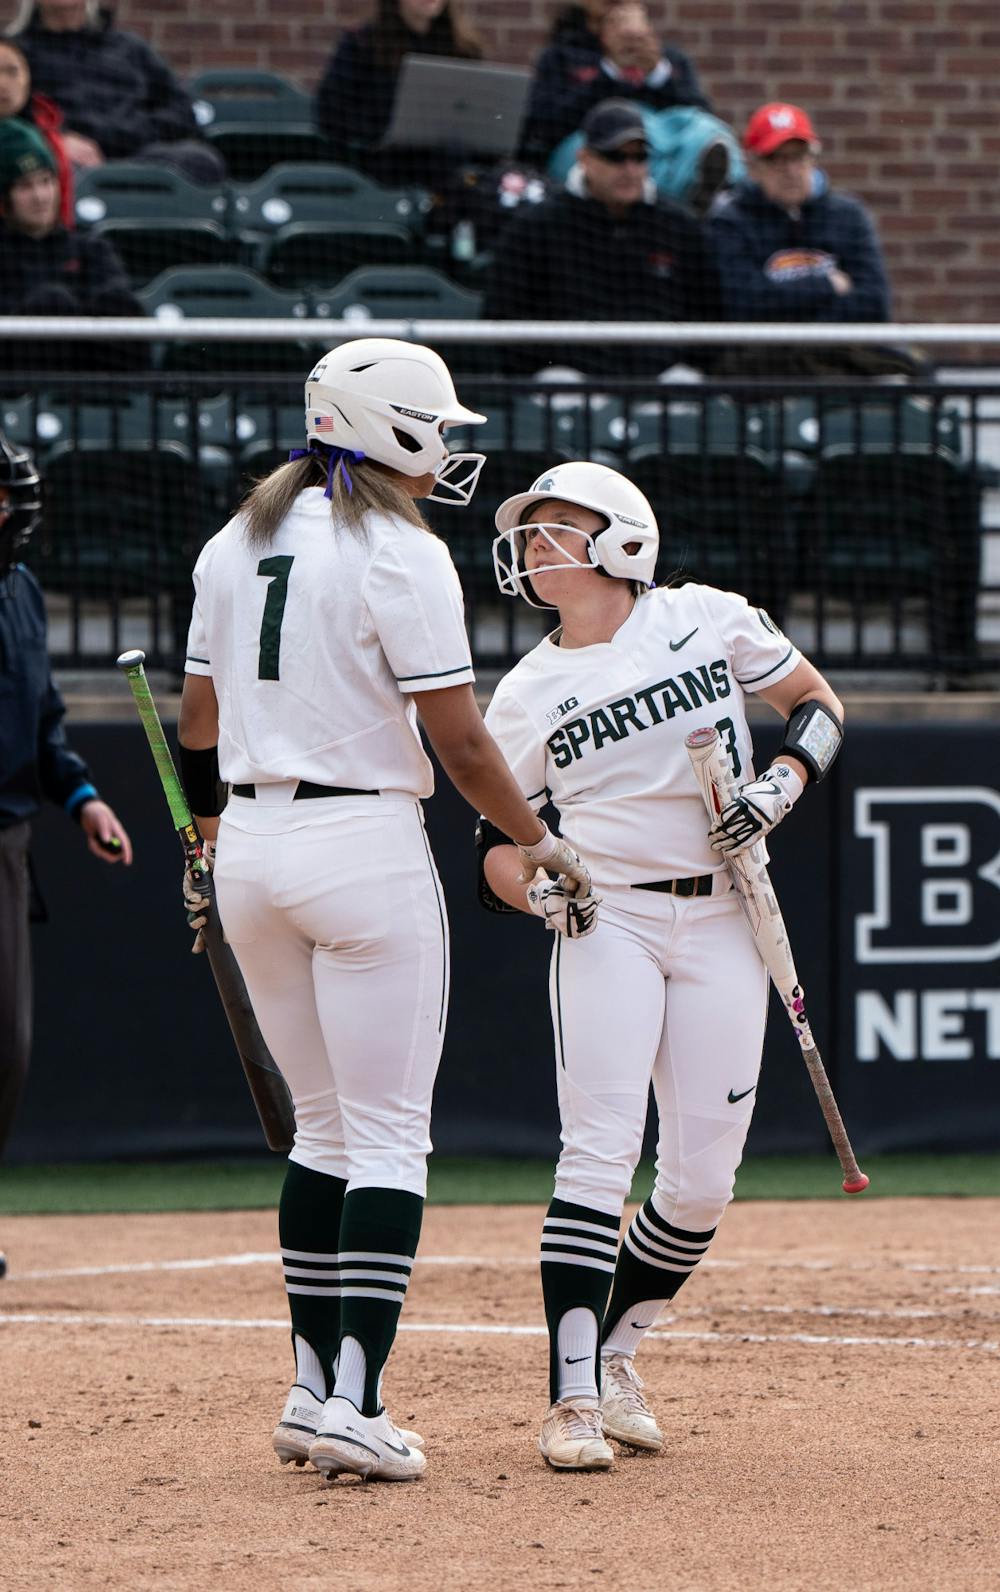 <p>Senior Courtney Callahan talks to teammate Camryn Wincher before Wincher steps up to bat during the matchup on April 29th, 2022. </p>